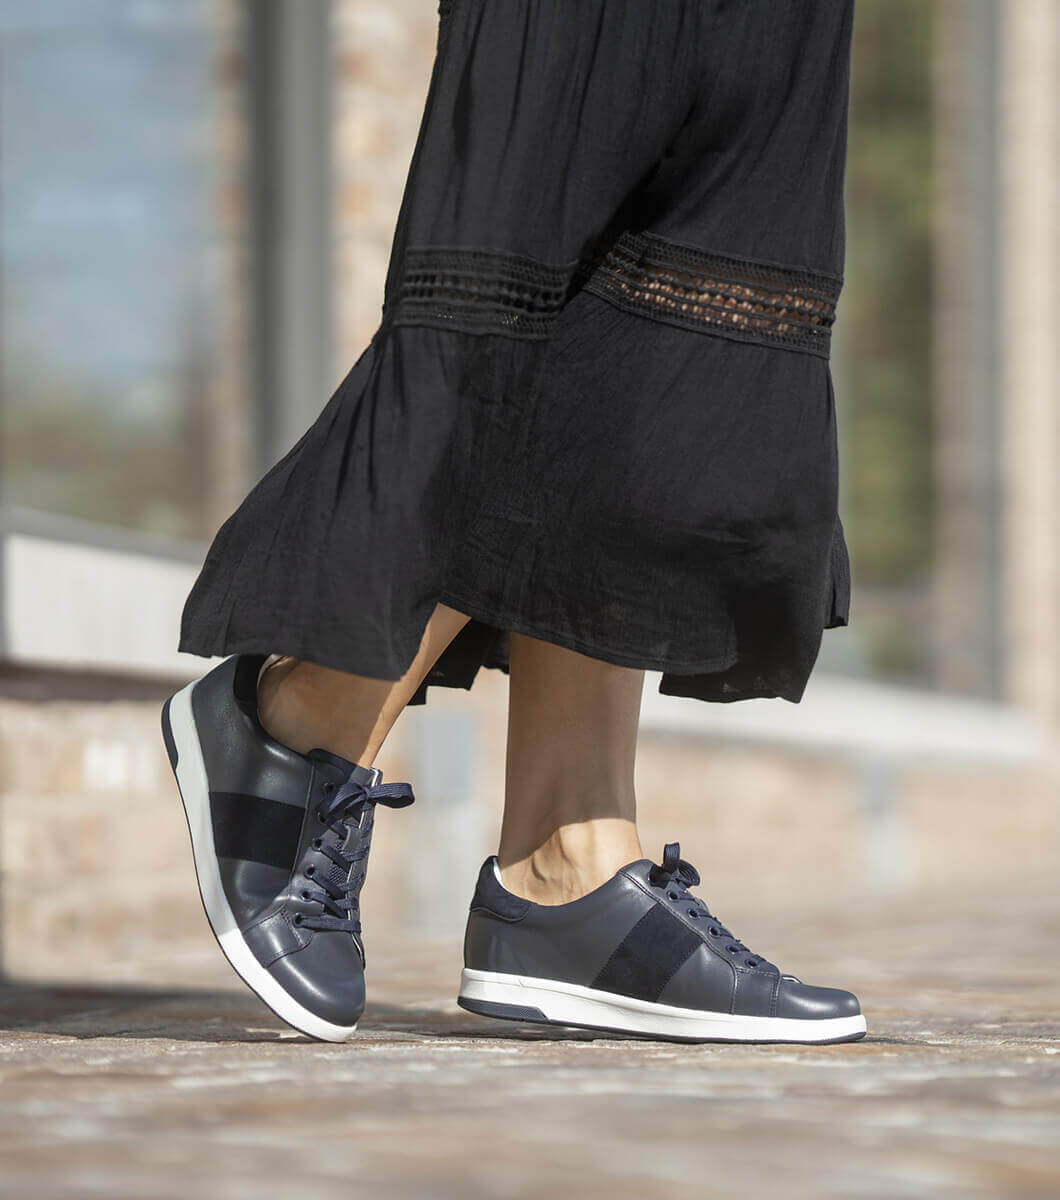 Women’s Newest Shoes | NAVY Lace To Toe Sneaker | Florsheim Crossover